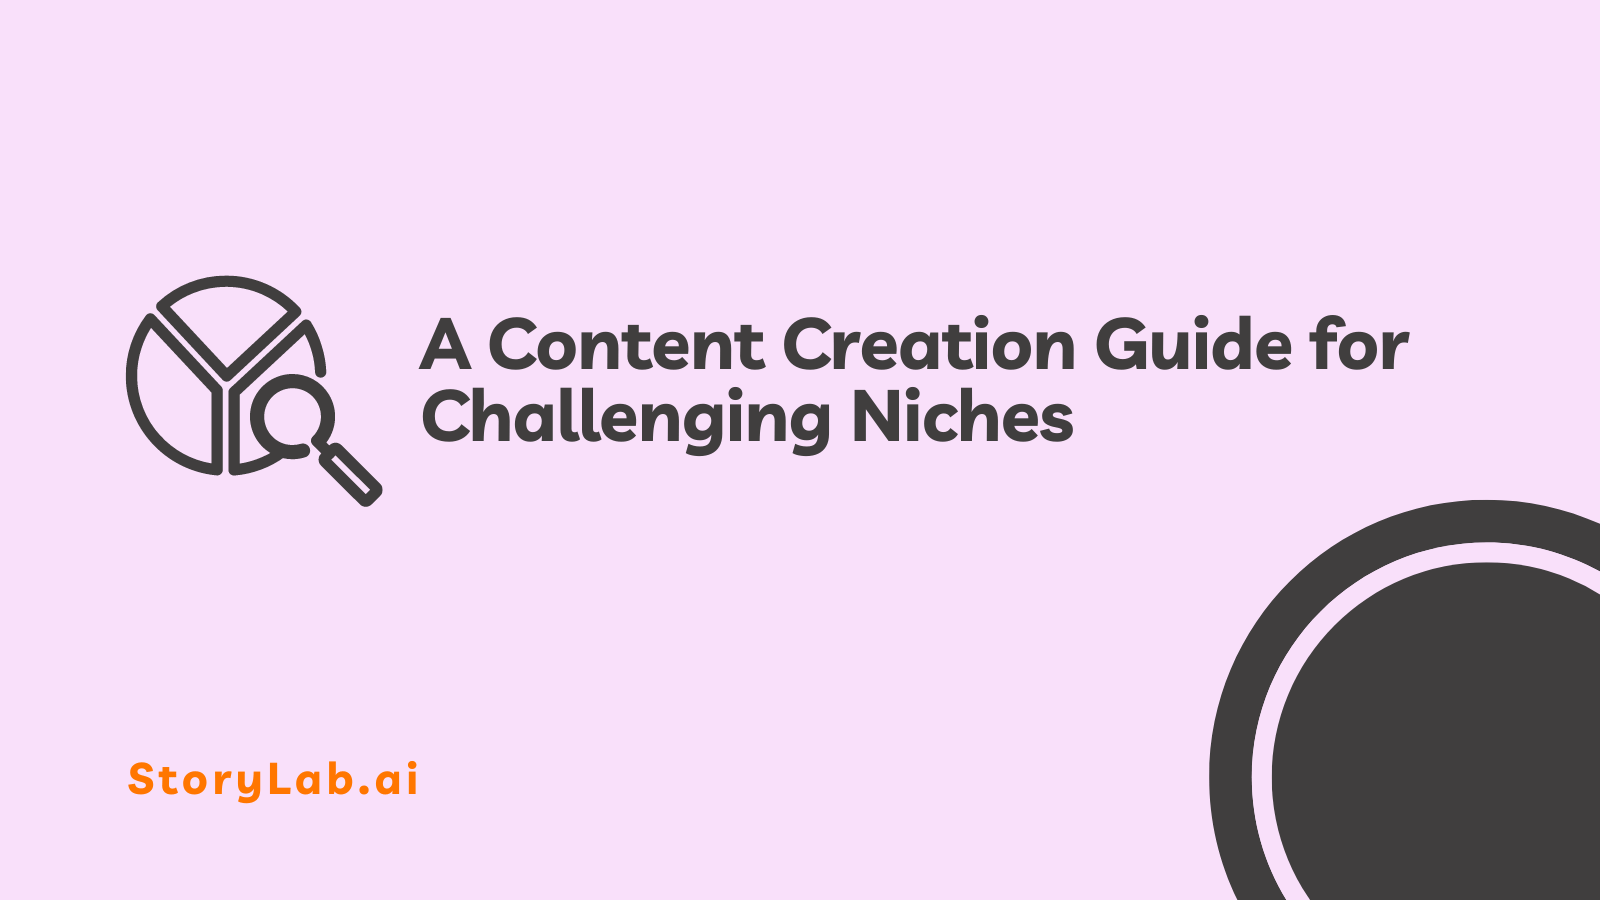 A Content Creation Guide for Challenging Niches